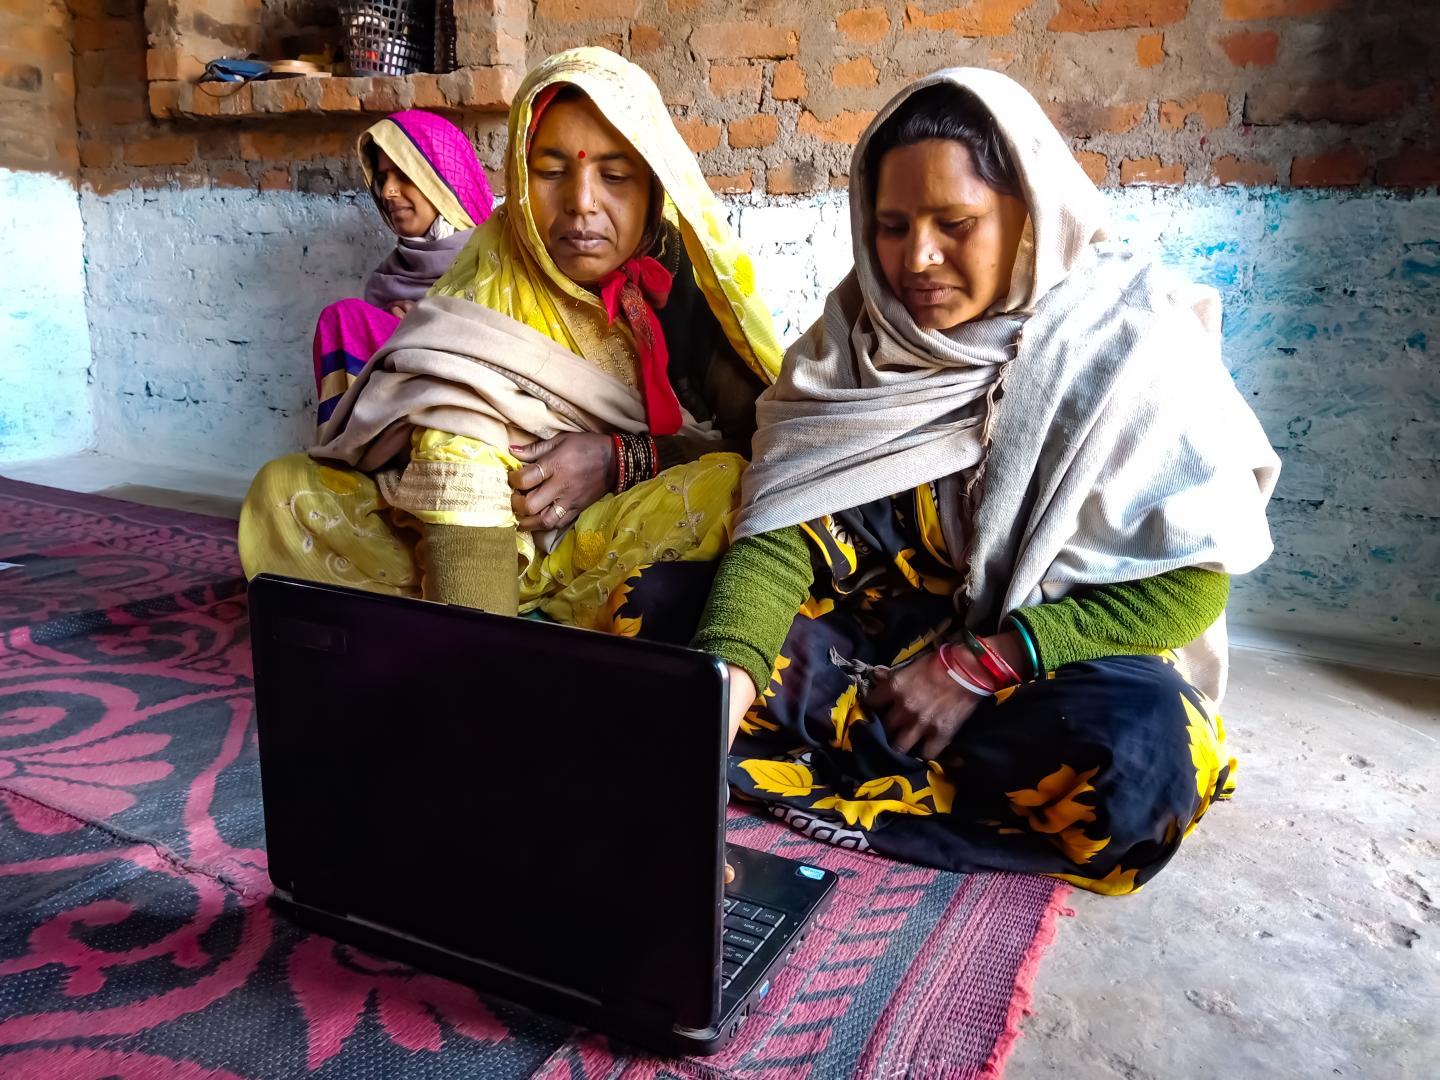 Two Indian women sitting on carpet looking at a computer. 